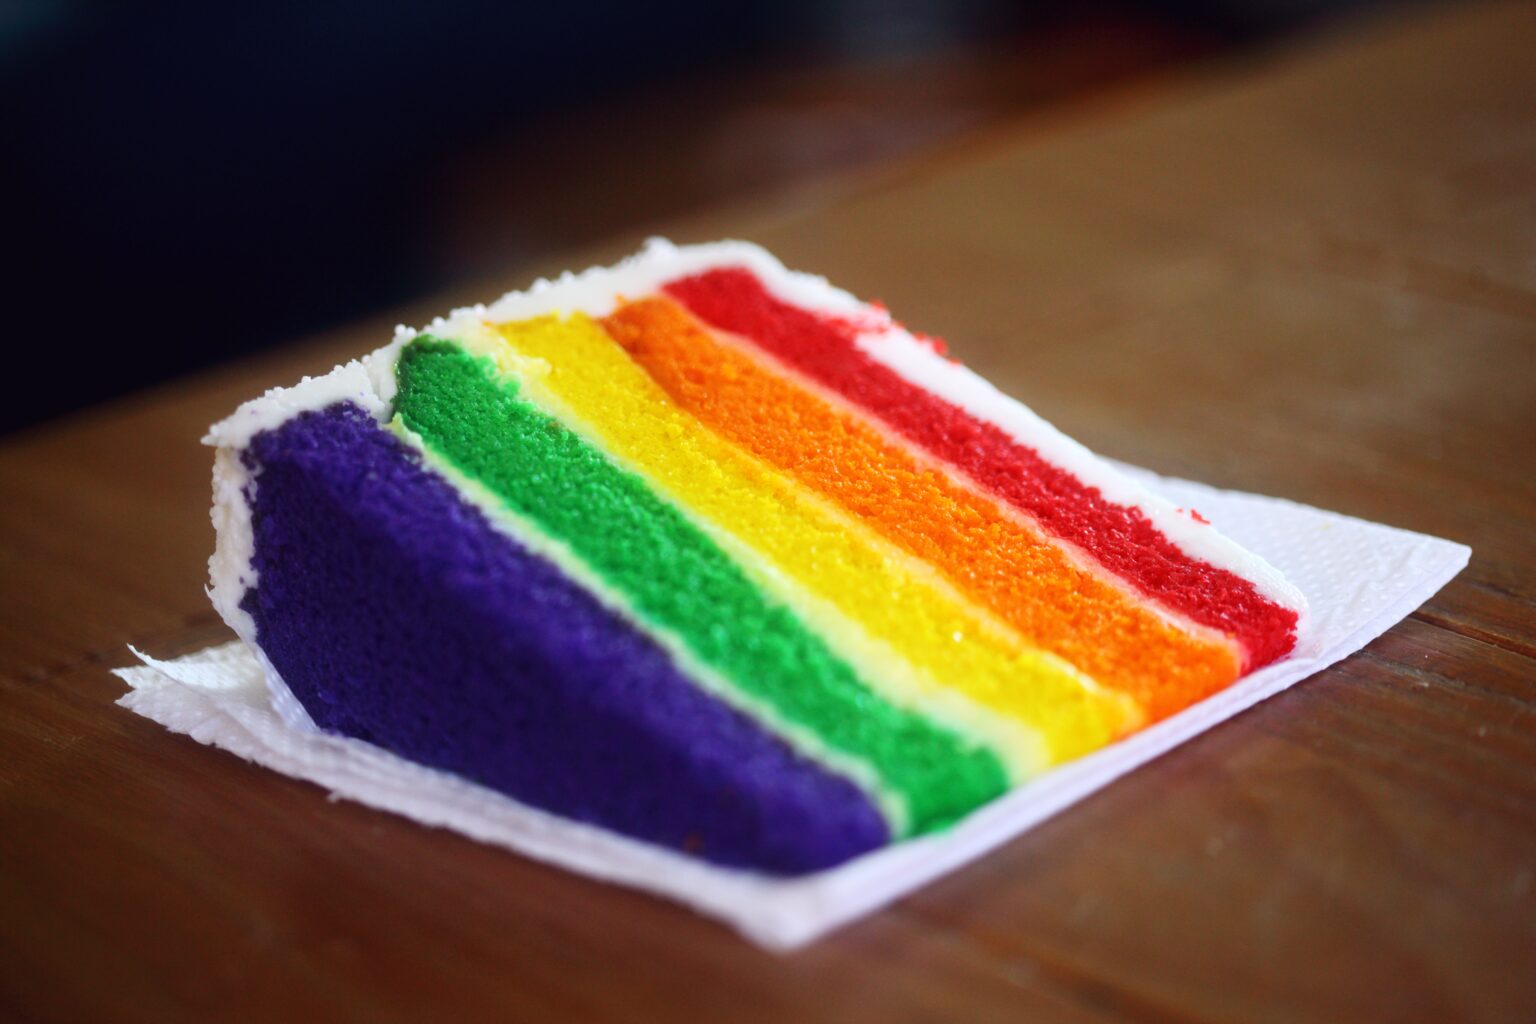 Rainbow cake depicting pride flag made for Youth Talk